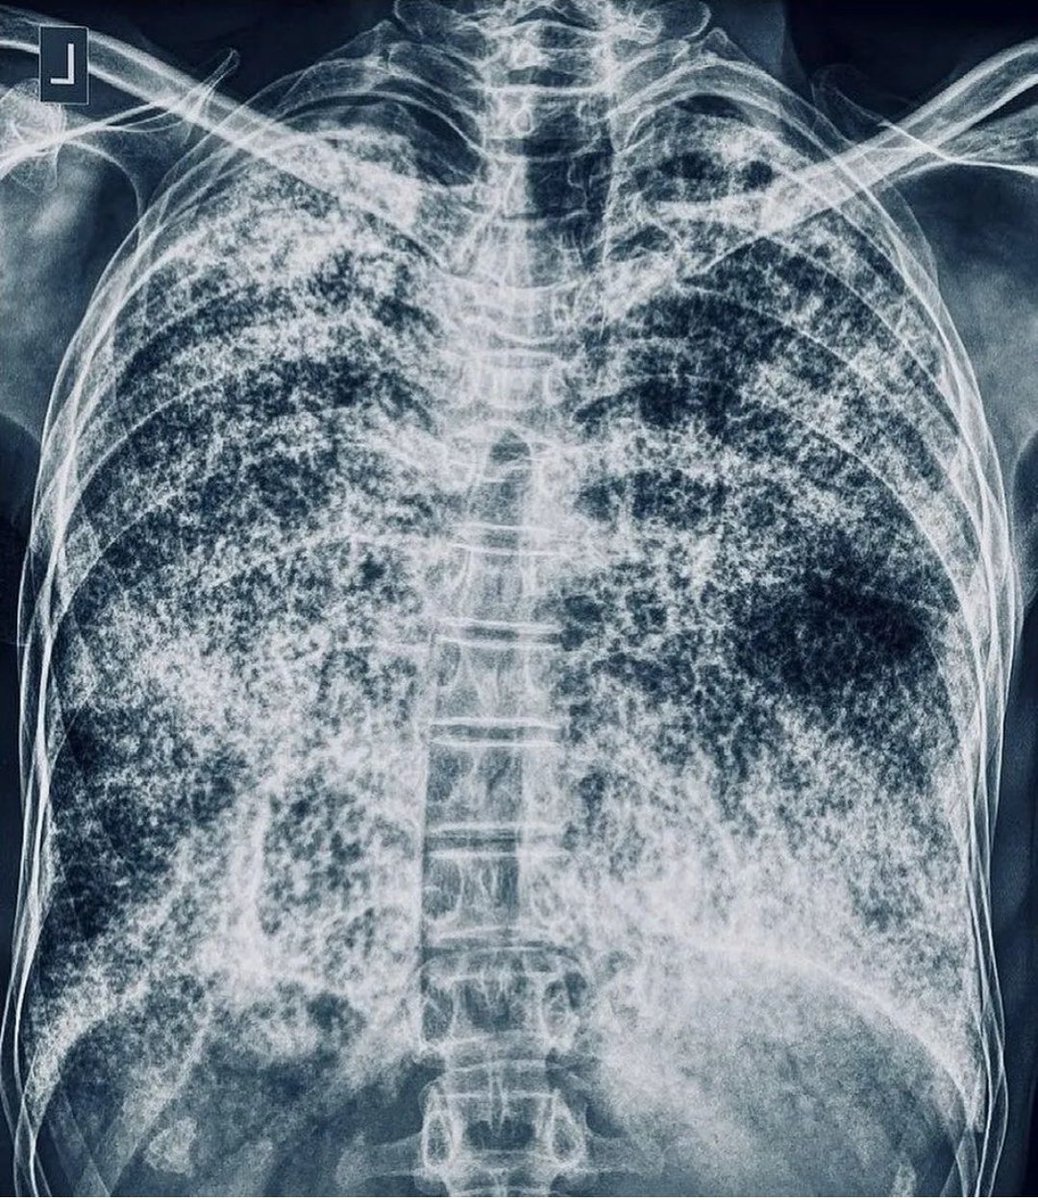 A patient with progressive dyspnea and dry cough for 3 months. Chest x-ray reveals the vanished heart. What is the diagnosis?
#MedTwitter #MedX #MedEd